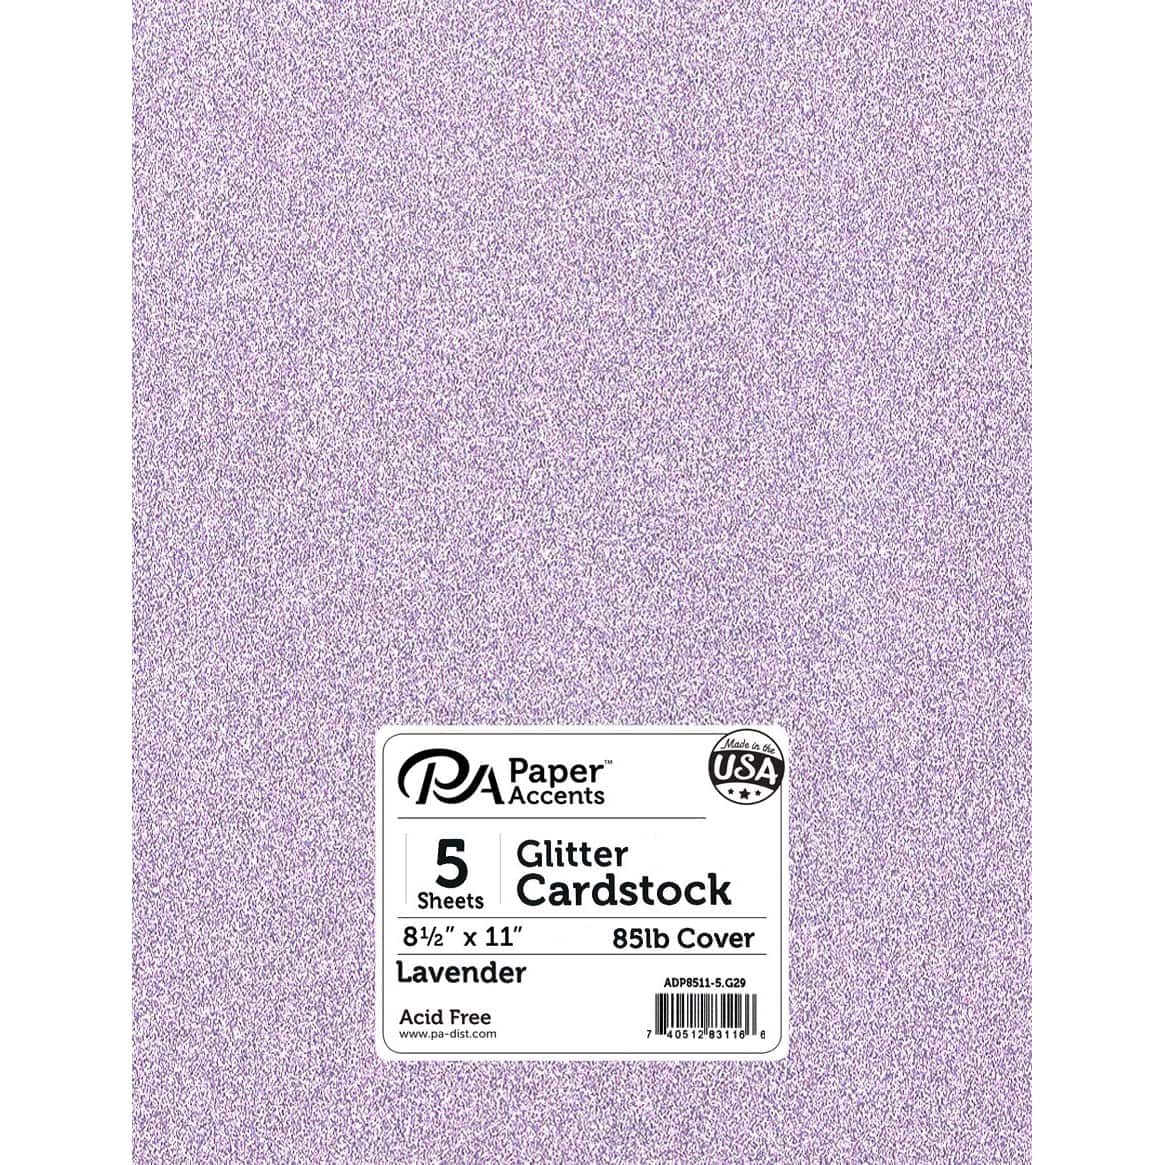 PA Paper™ Accents 8.5 x 11 85lb. Glitter Cardstock, 5 Sheets